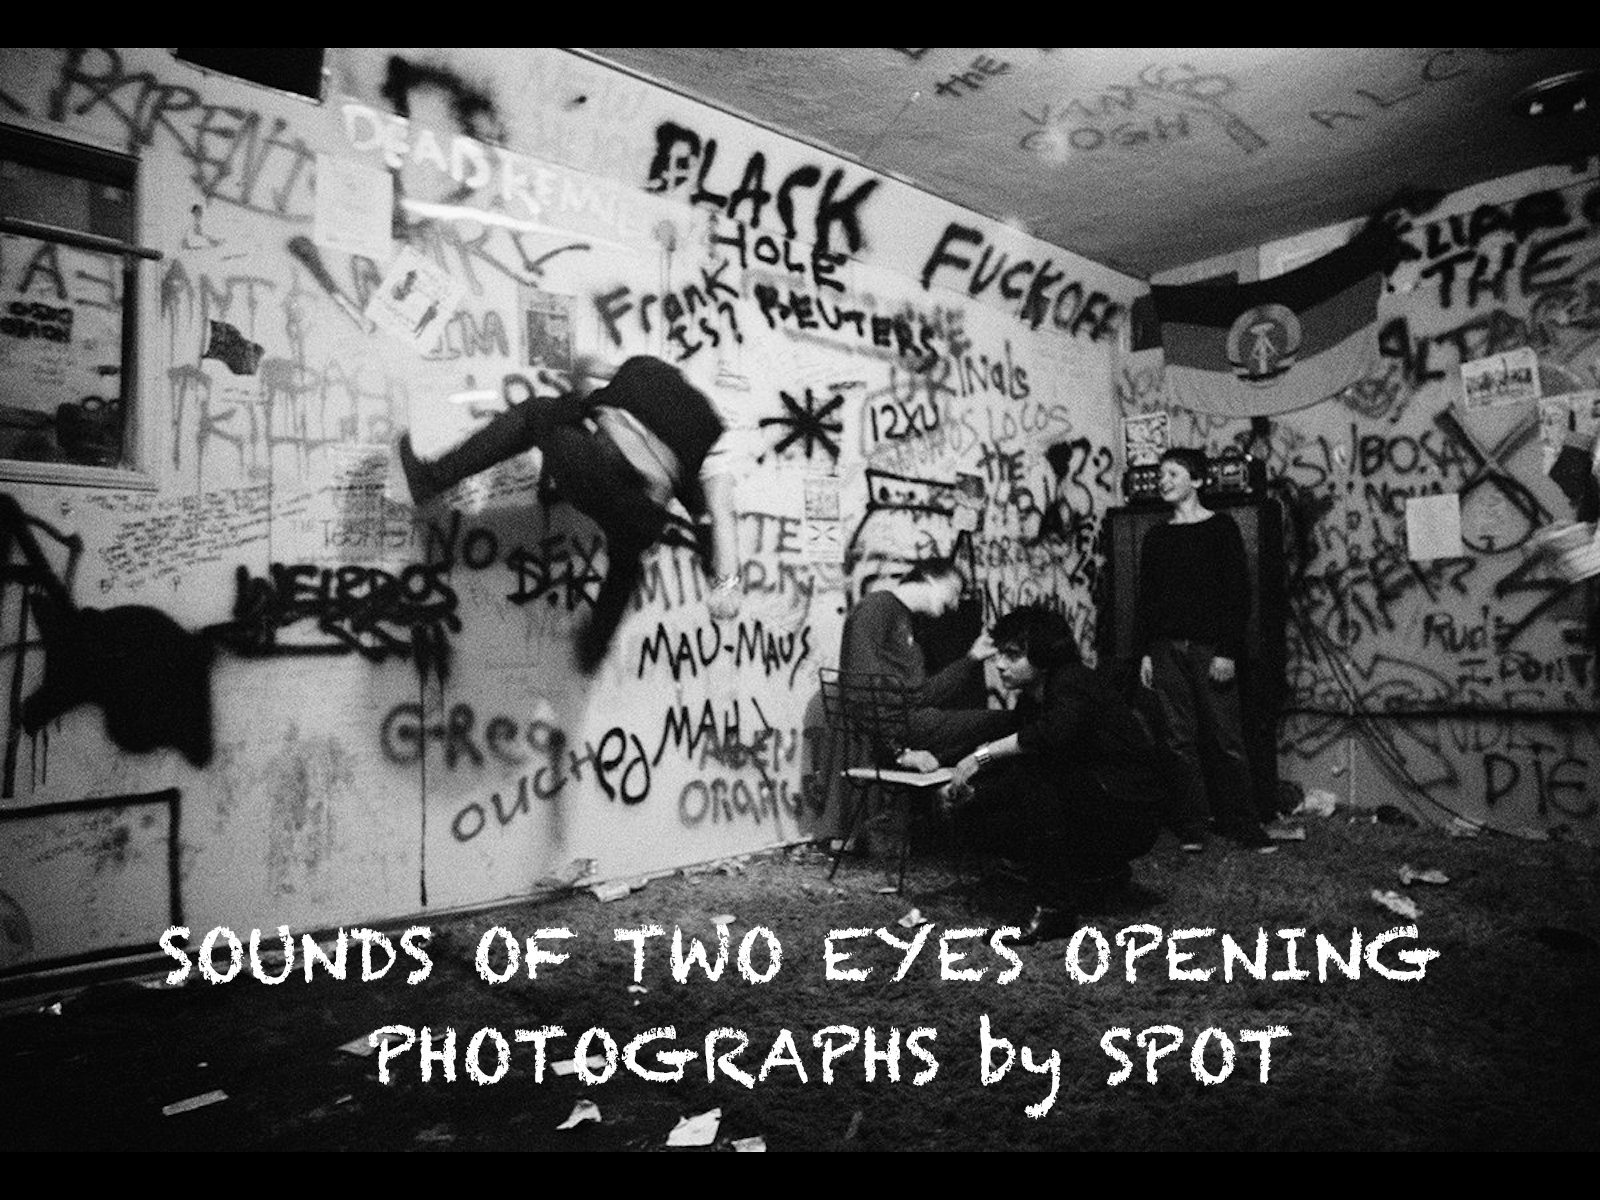 SOUNDS OF TWO EYES OPENING – PHOTOGRAPHS by SPOT